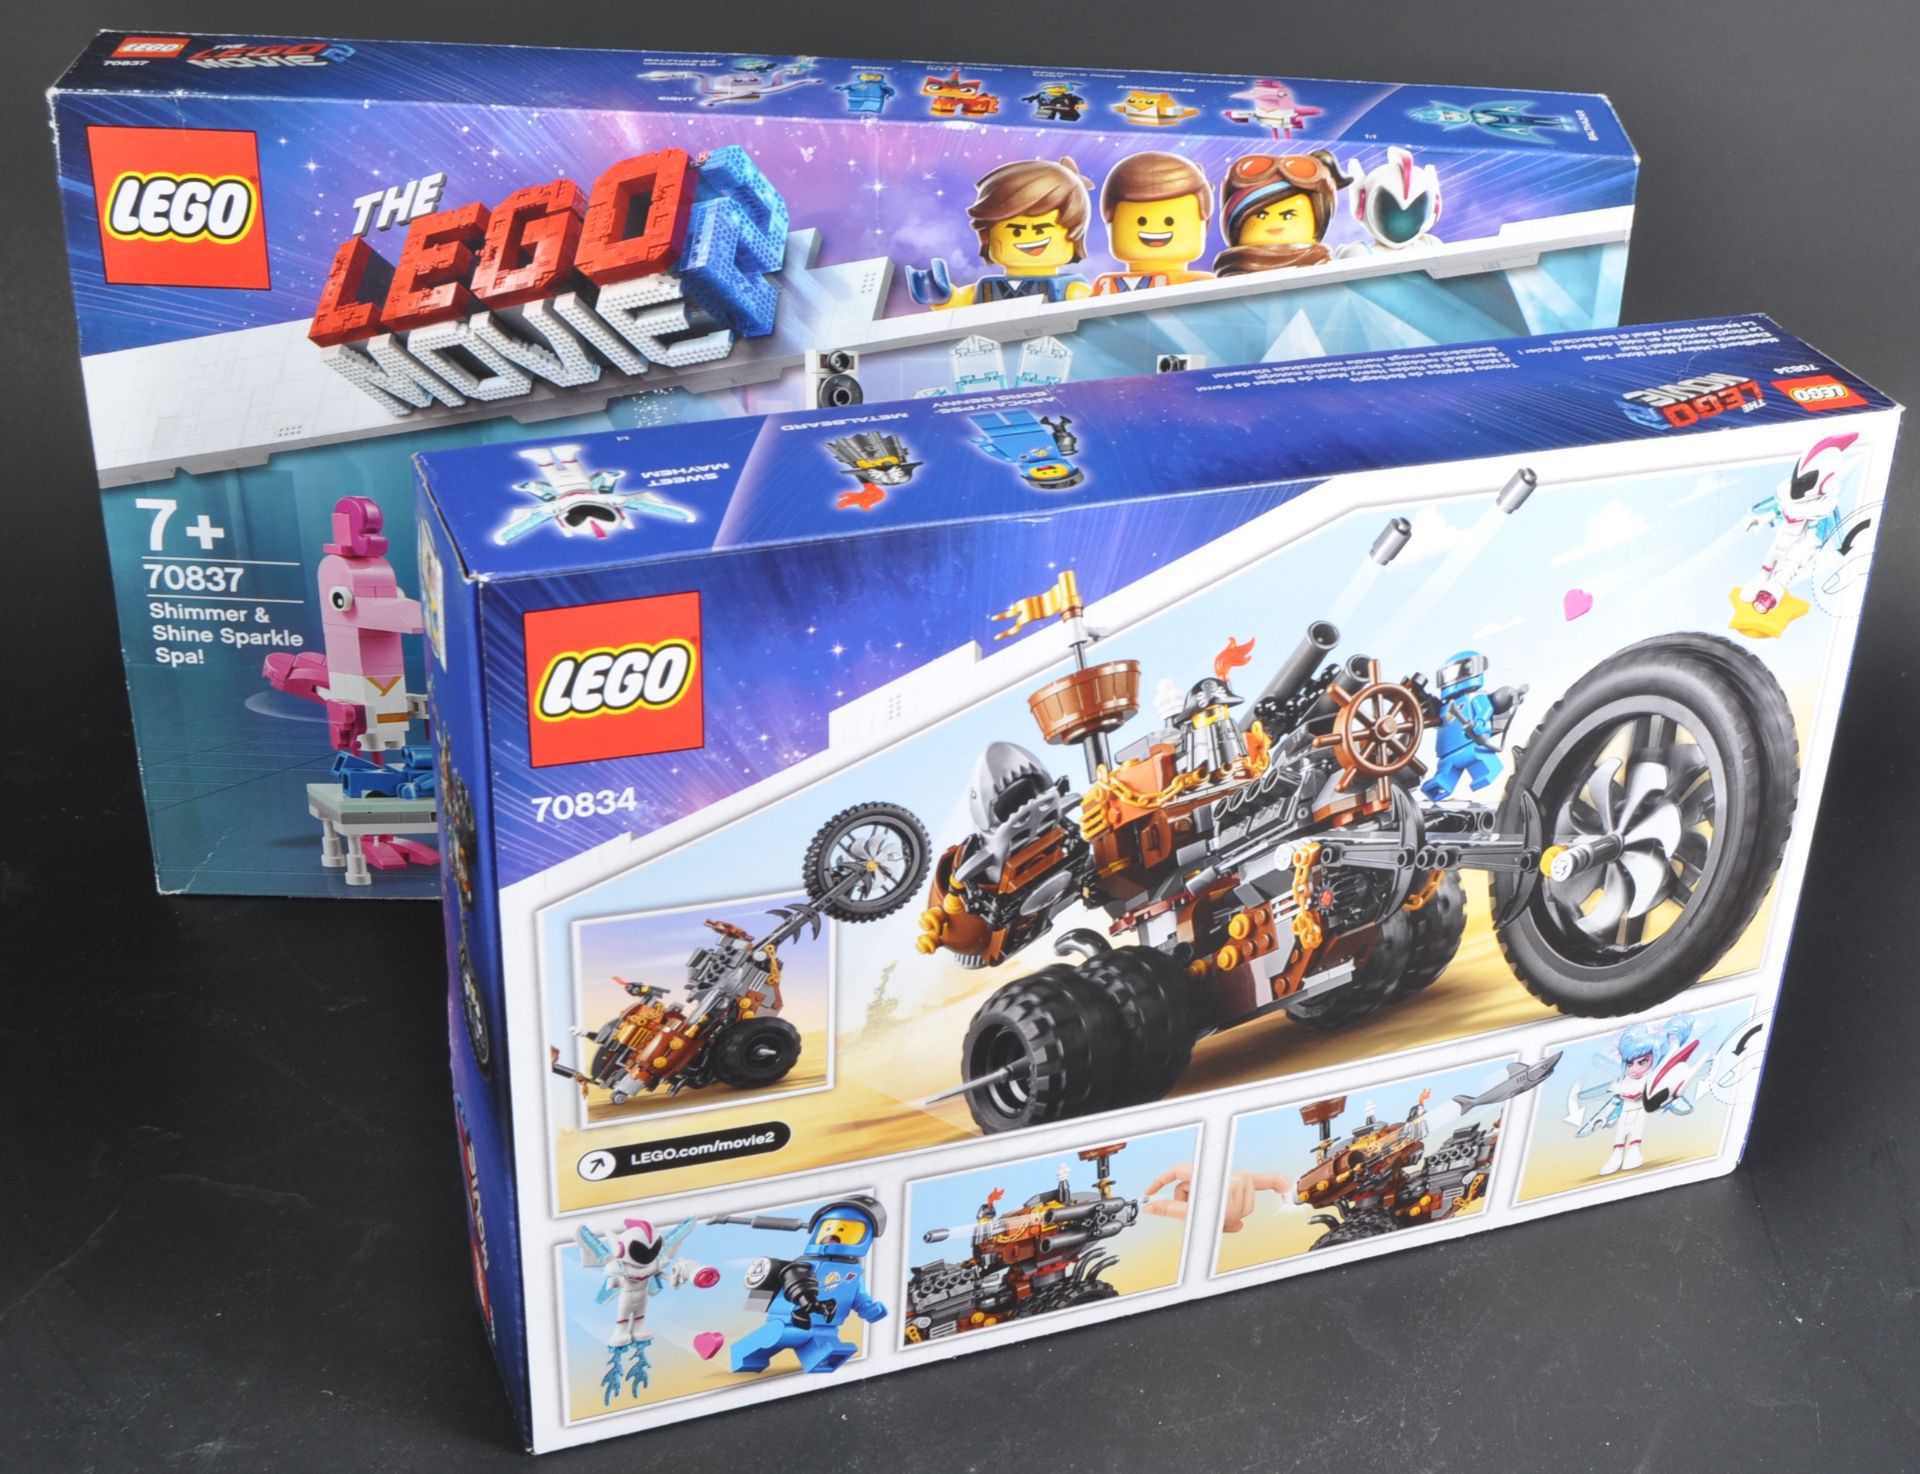 LEGO SETS - TWO THE LEGO MOVIE SETS - 70837 & 70834 - Image 3 of 5